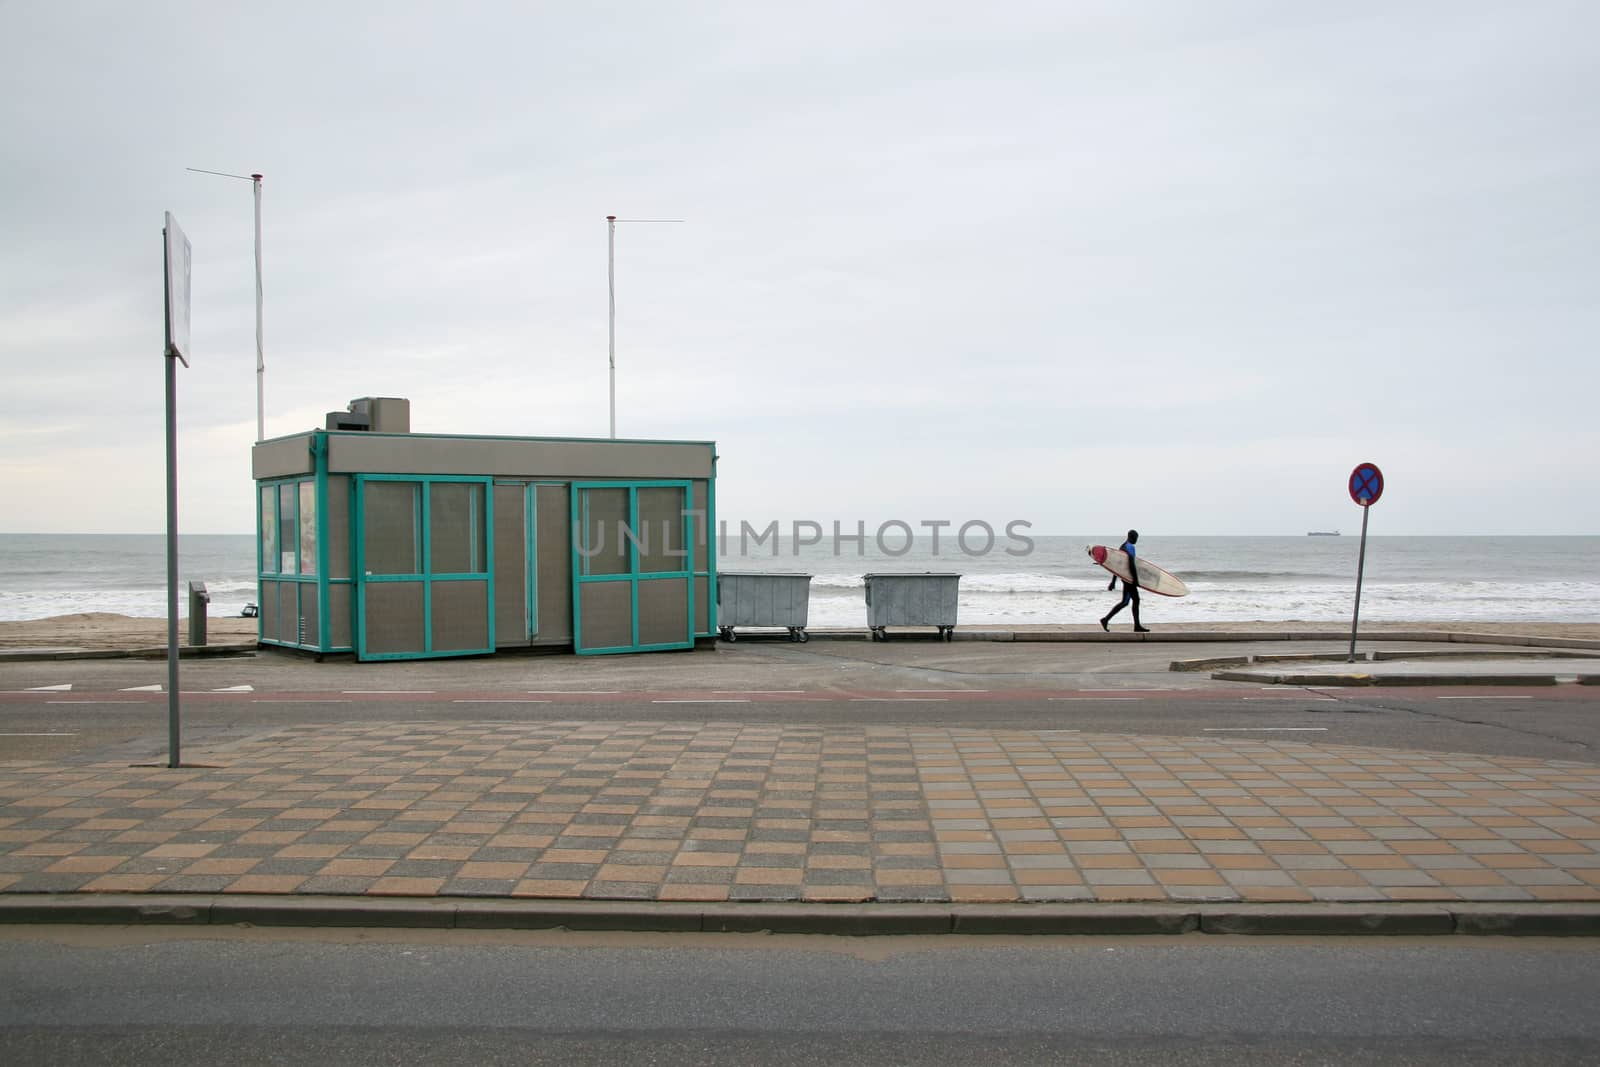 Lone surfer in neoprene swimsuit walking on pavement to empty beach on a cold winter overcast day. The Hague, Netherlands